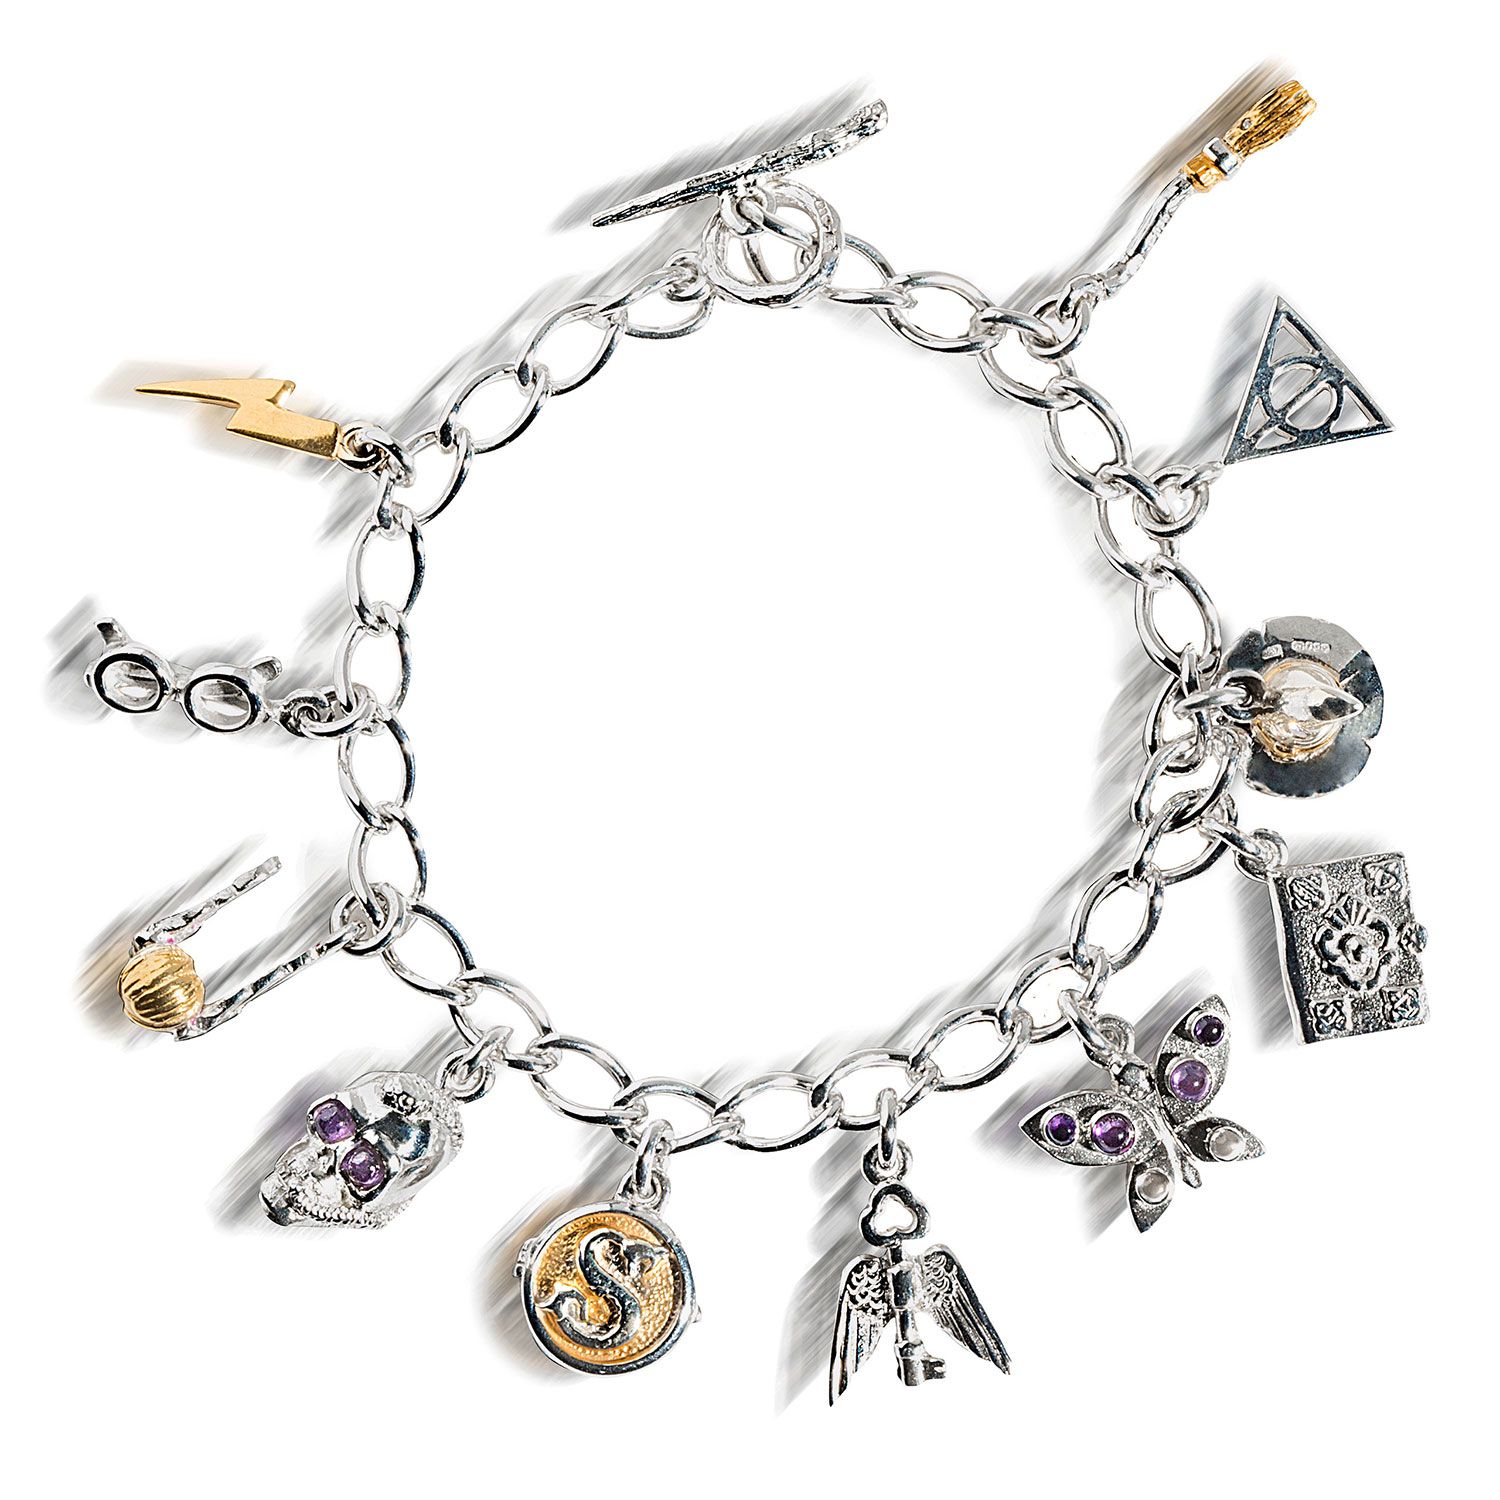 Harry Potter Collection Charm Set For Pandora  Pandora harry potter, Harry  potter charm bracelet, Harry potter charms